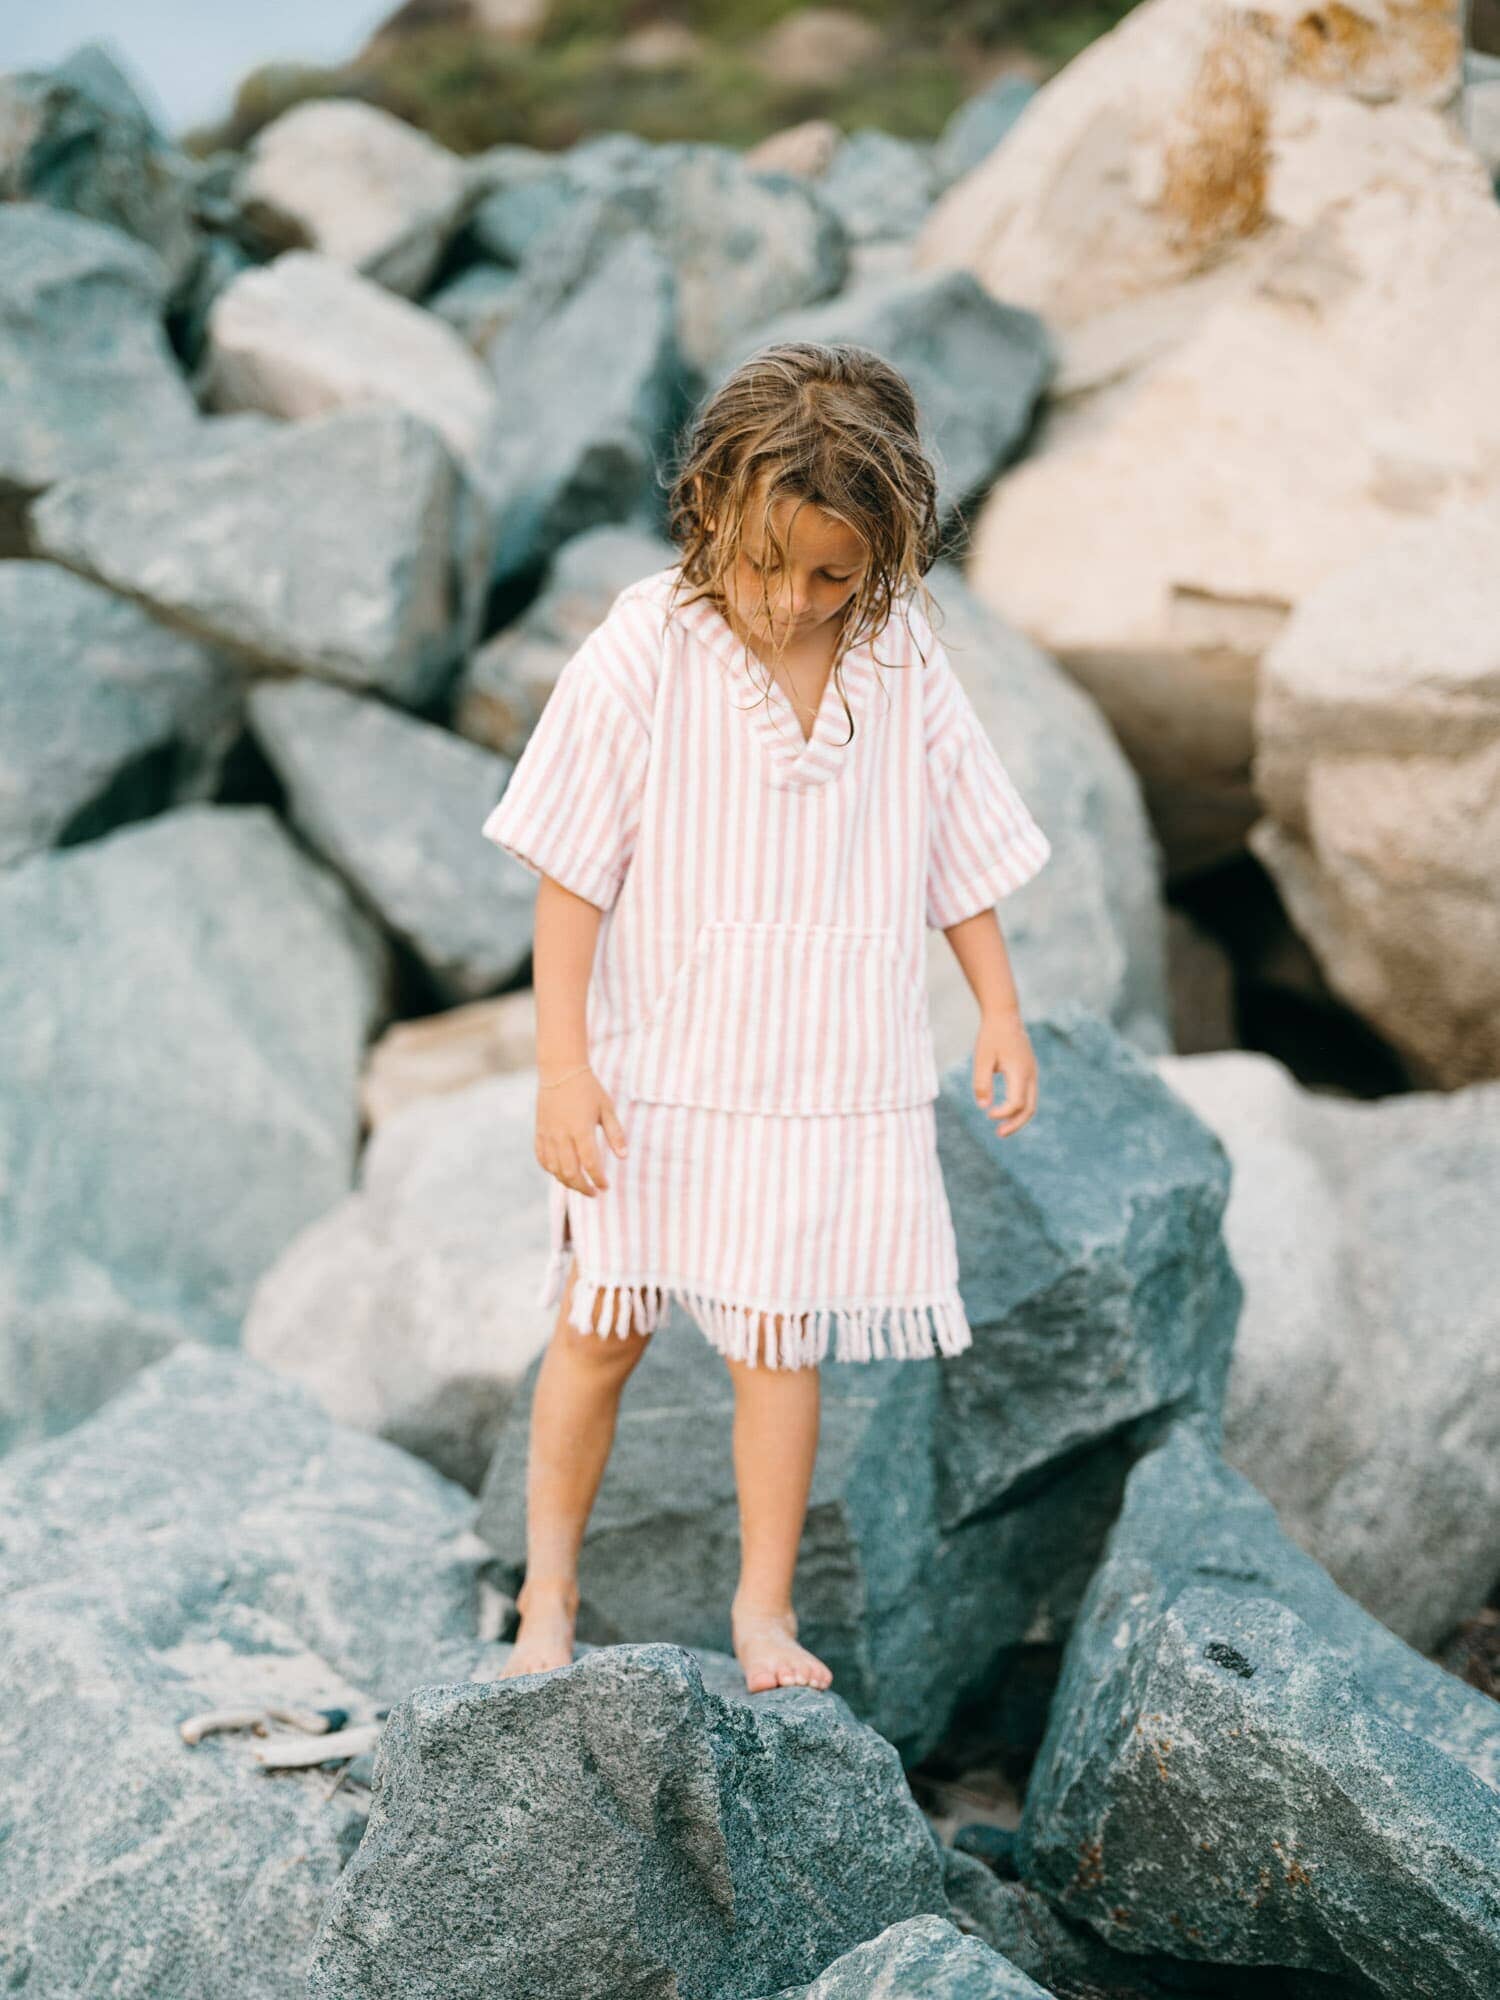 Child in pink poncho playing on rocks